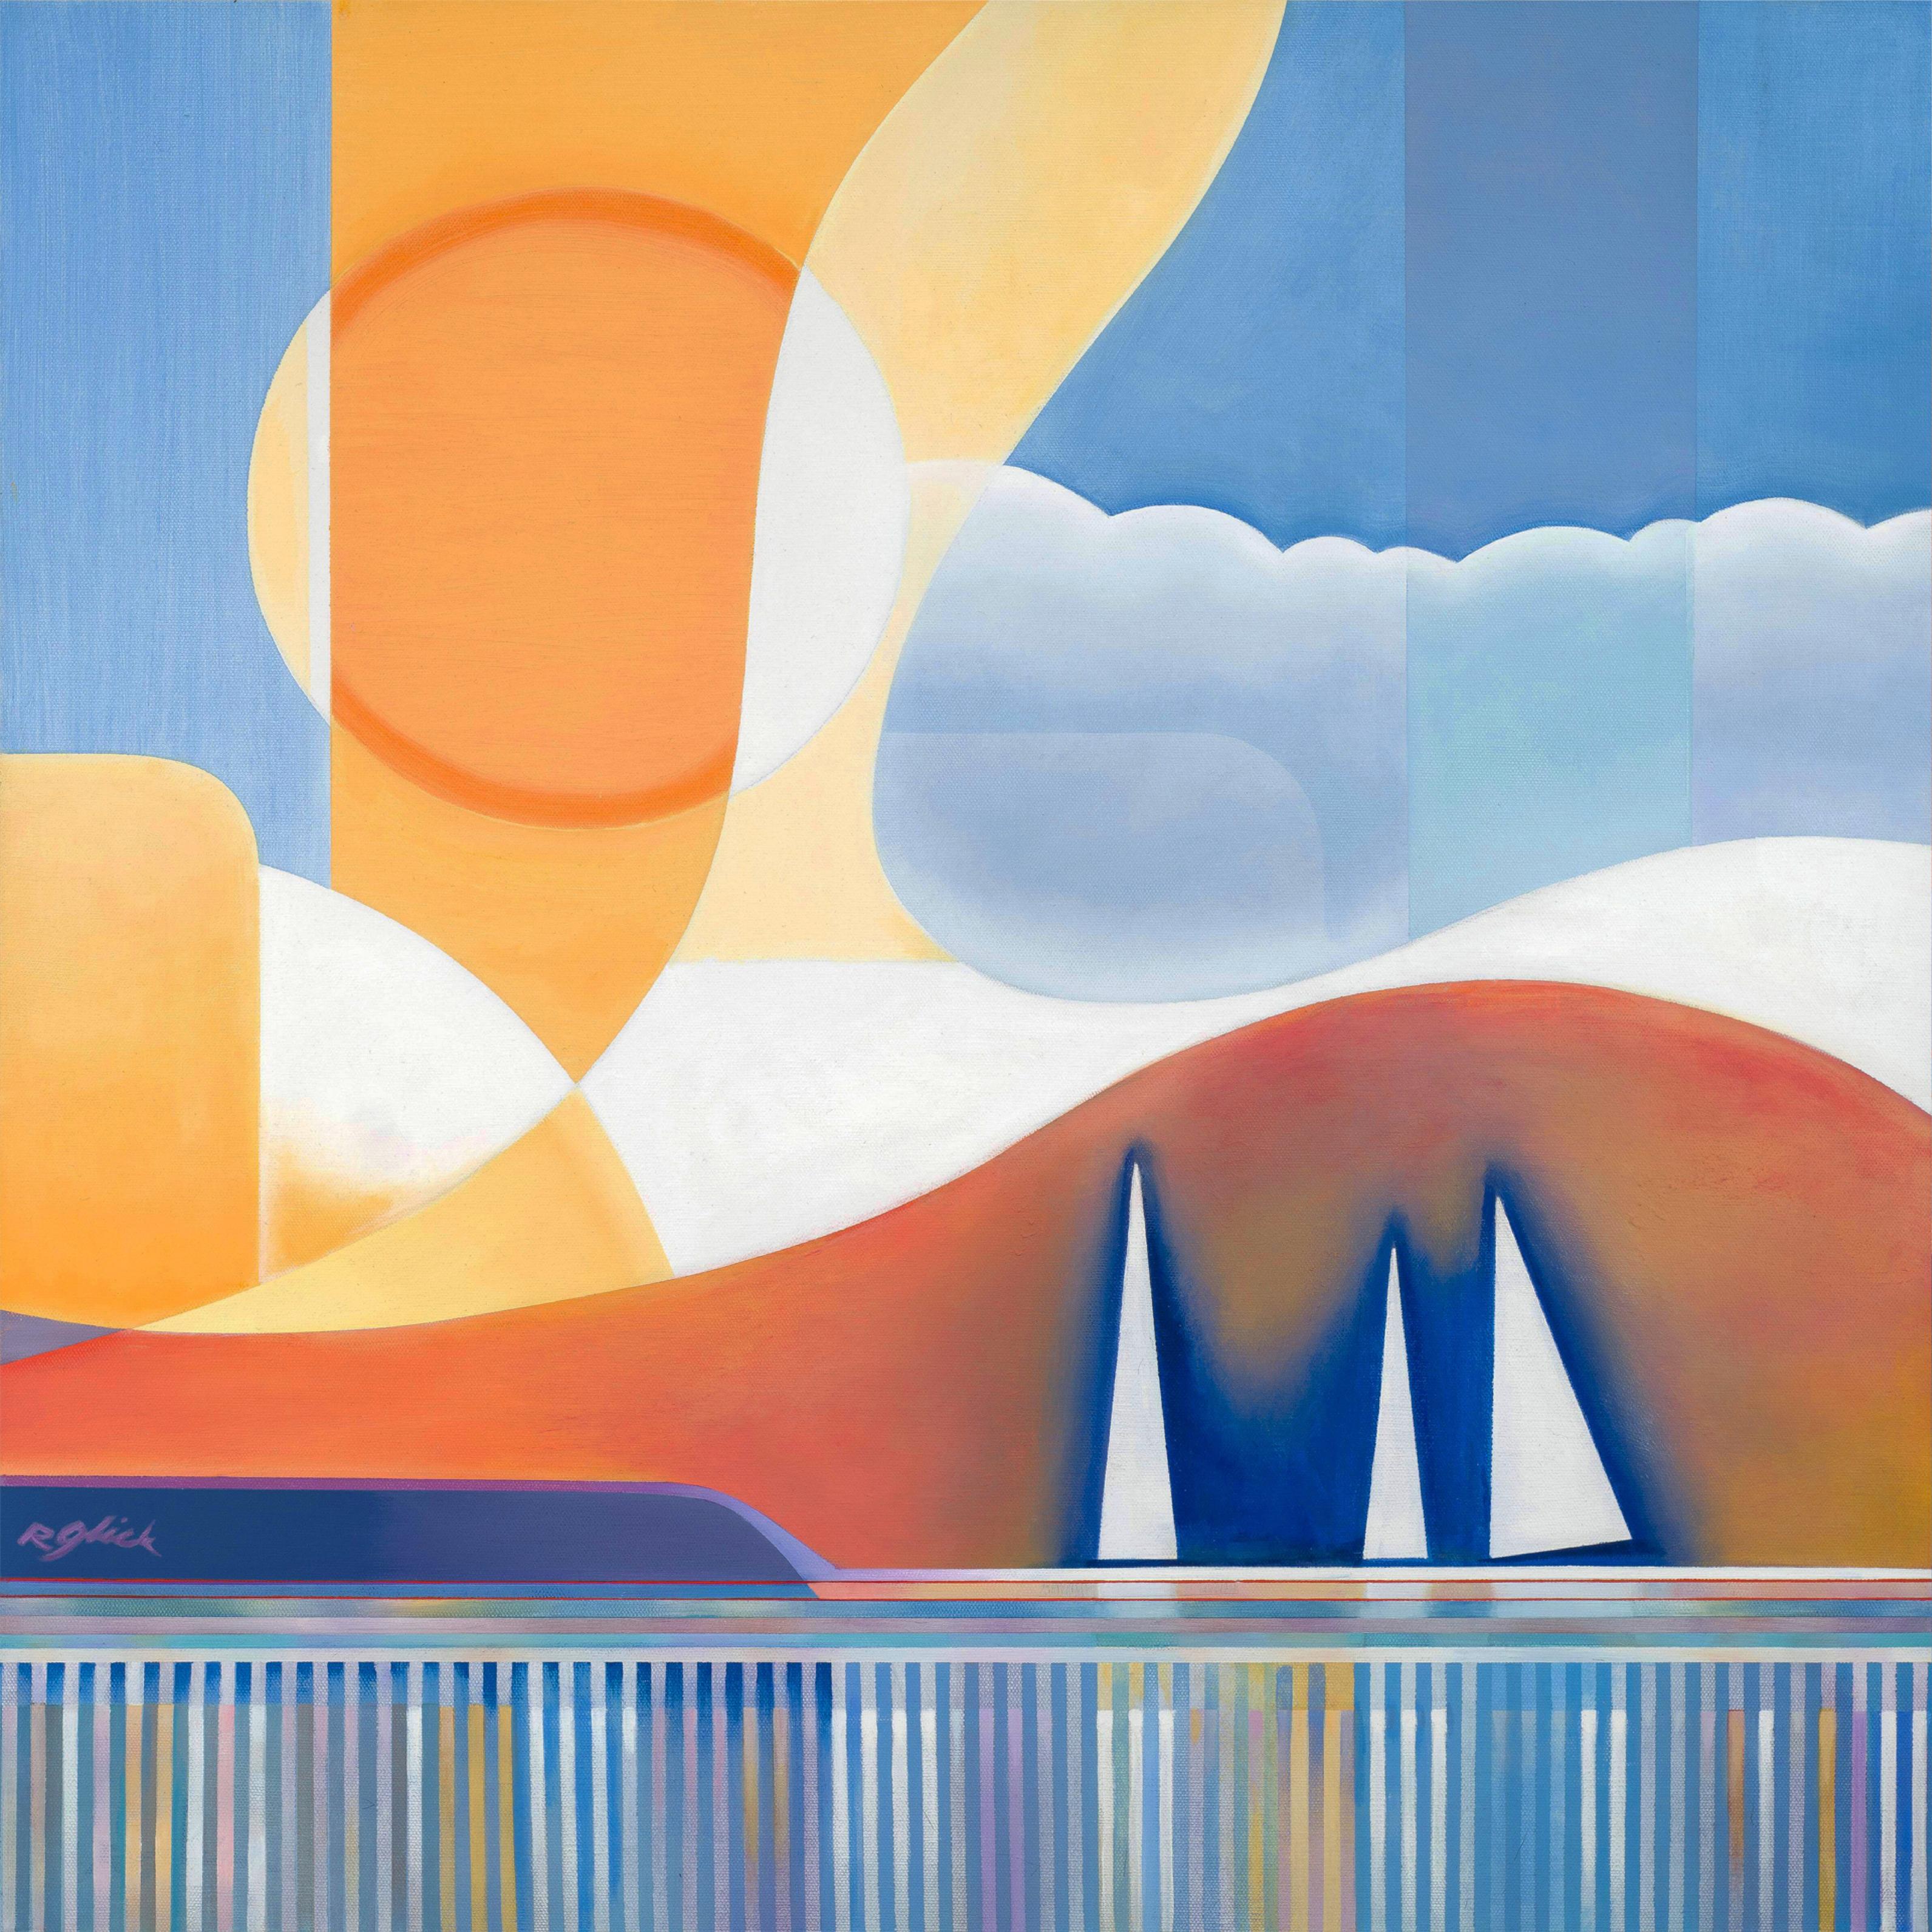 'By the Bay' - Shoreline Series - Vibrant Geometric Seascape with Boats - Contemporary Painting by Robert Glick